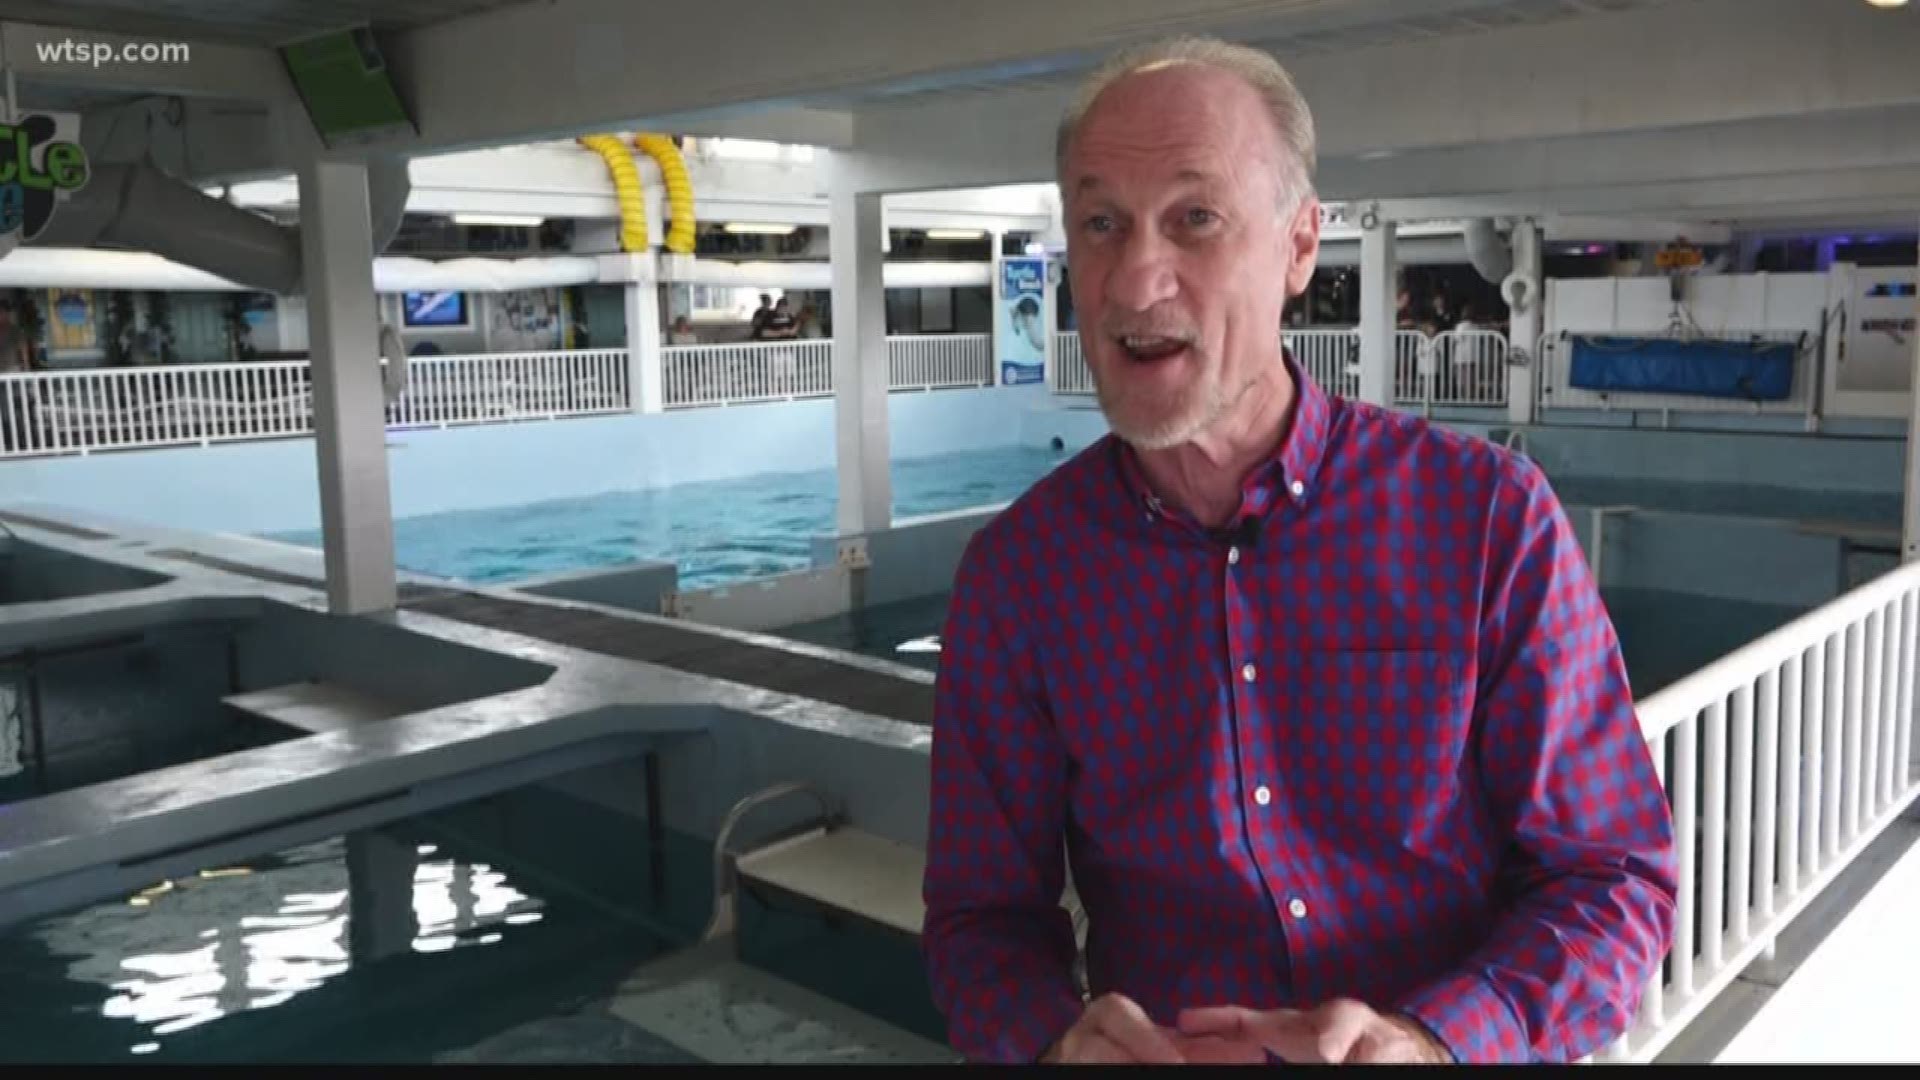 David Yates helped turn Winter's inspirational story into a beloved movie and transformed Clearwater Marine Aquarium into a tourism destination.